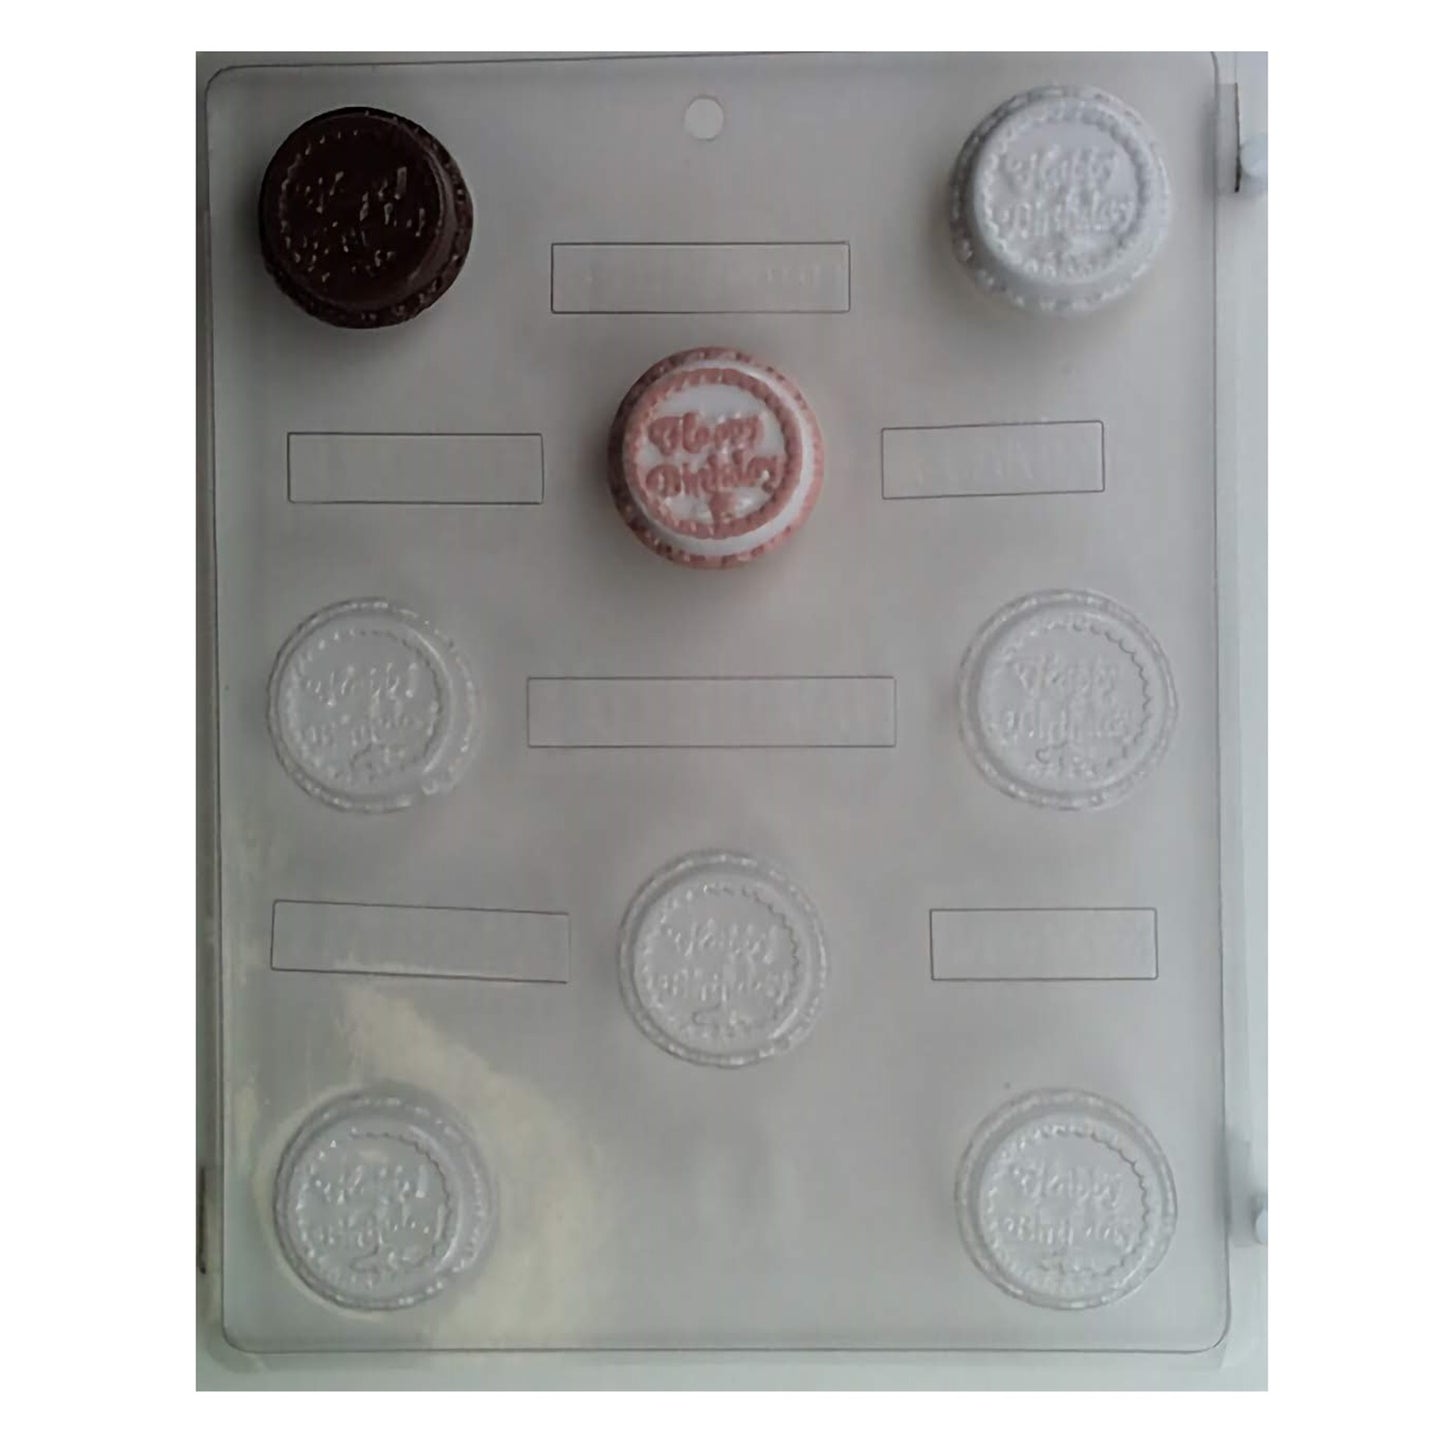 Round chocolate mold featuring 'Happy Birthday' text surrounded by a decorative border, ideal for creating celebratory candies for birthday parties.